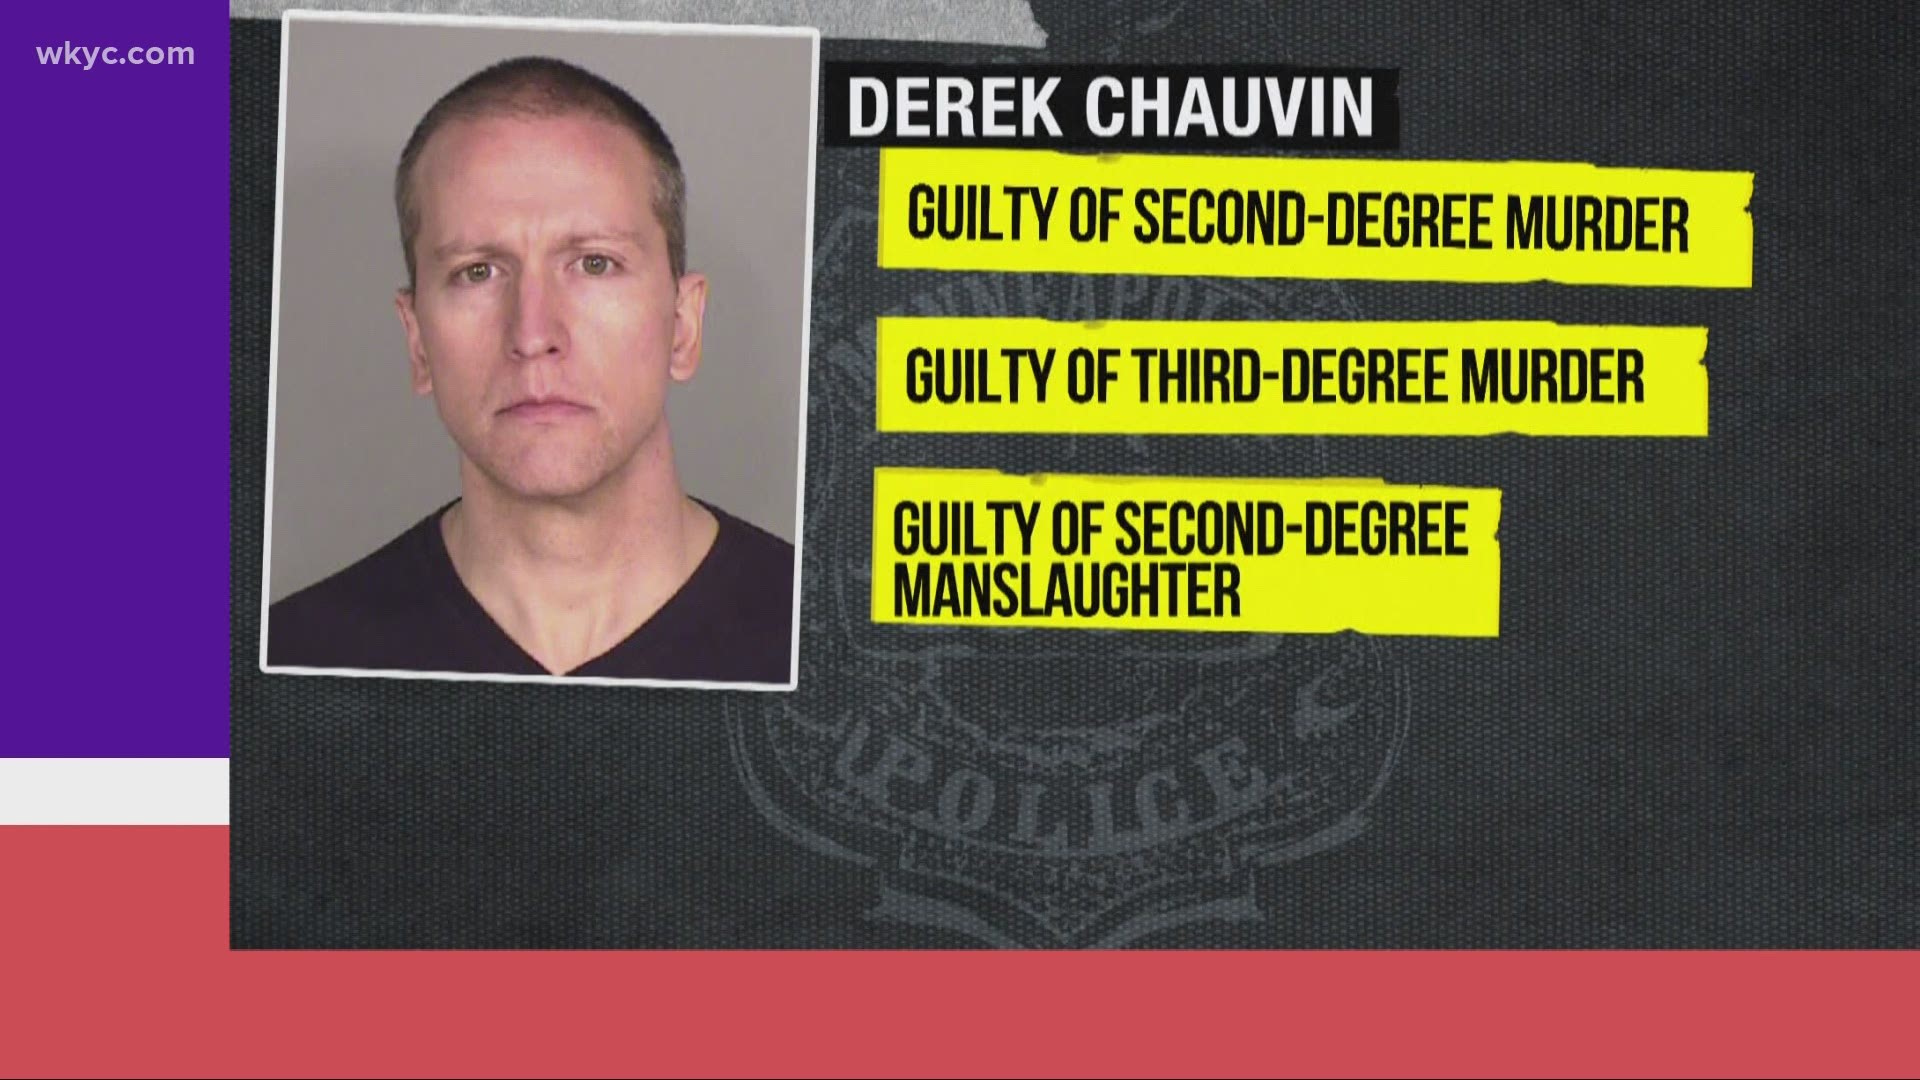 Here is everything you need to know after former officer Derek Chauvin was found guilty on all three charges against him connected to the death of George Floyd.